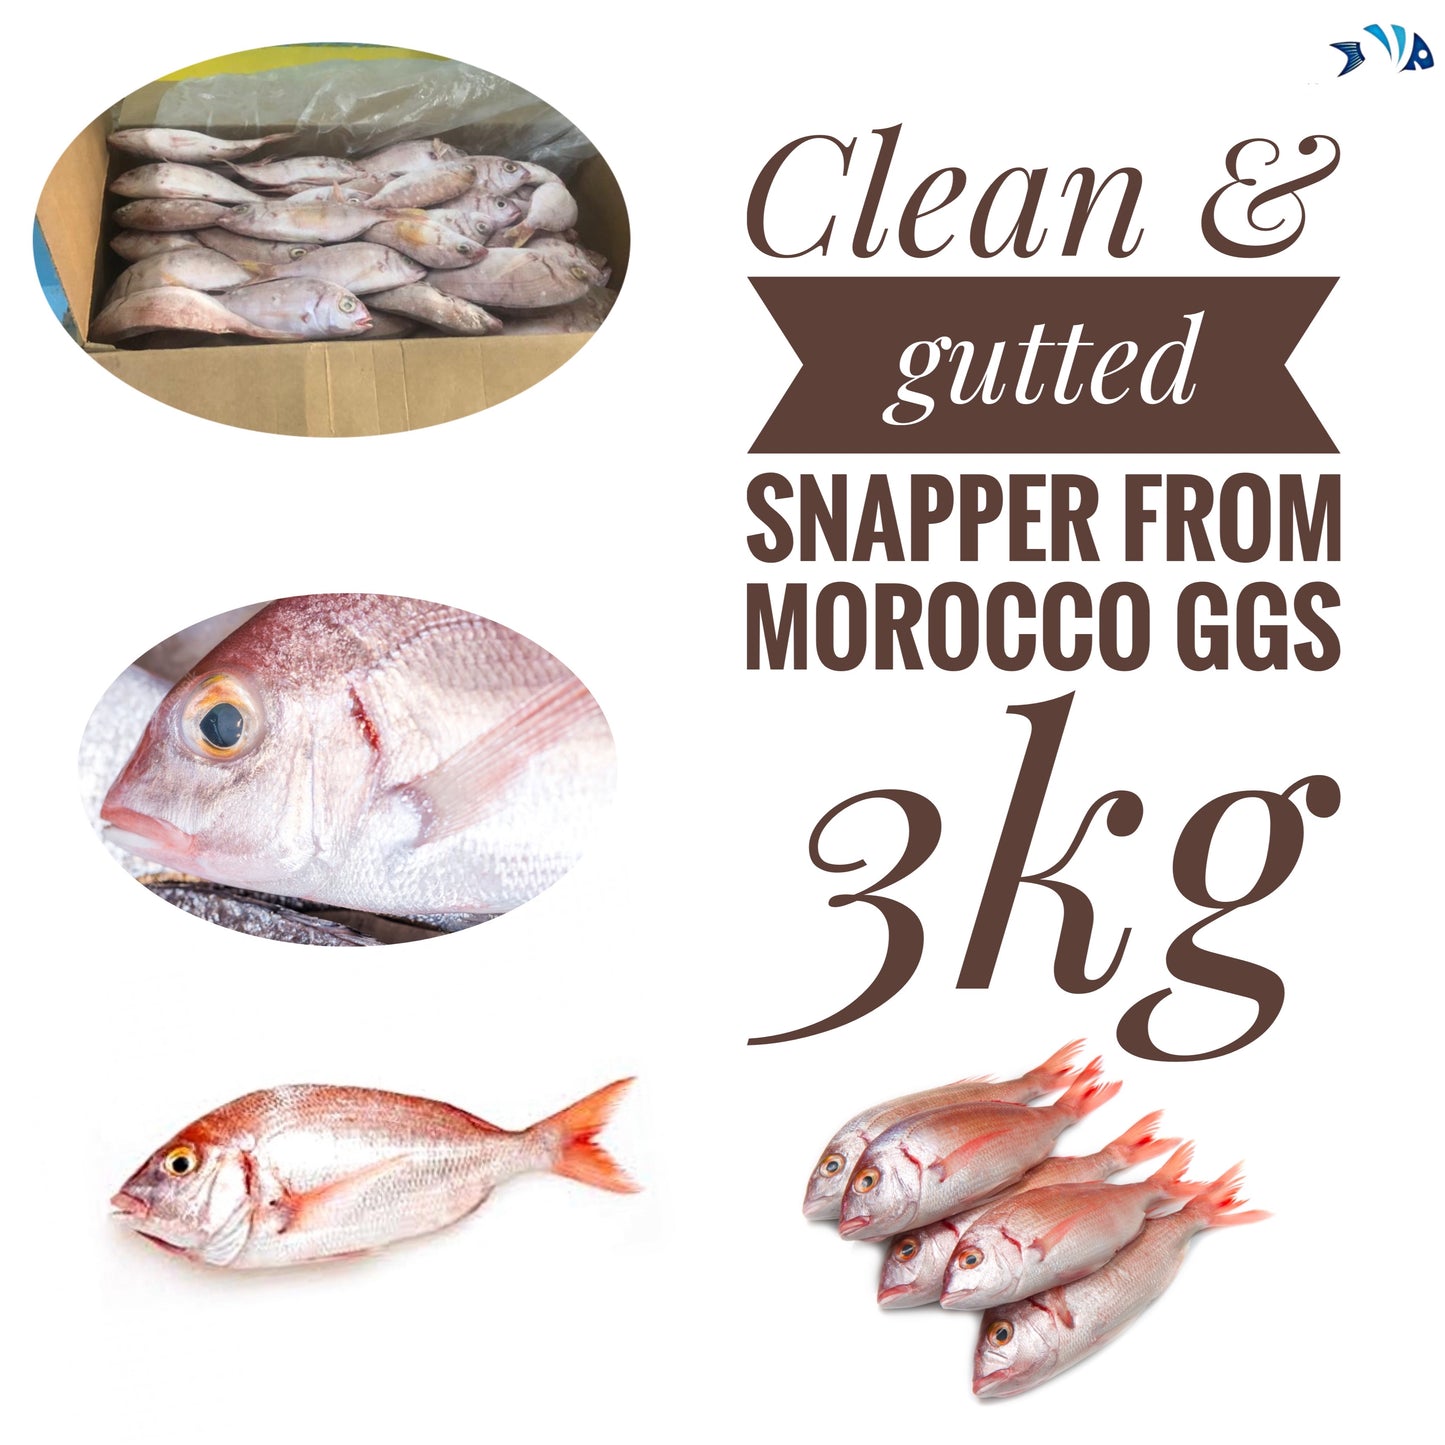 Clean & gutted snapper from Morocco ggs 3kg